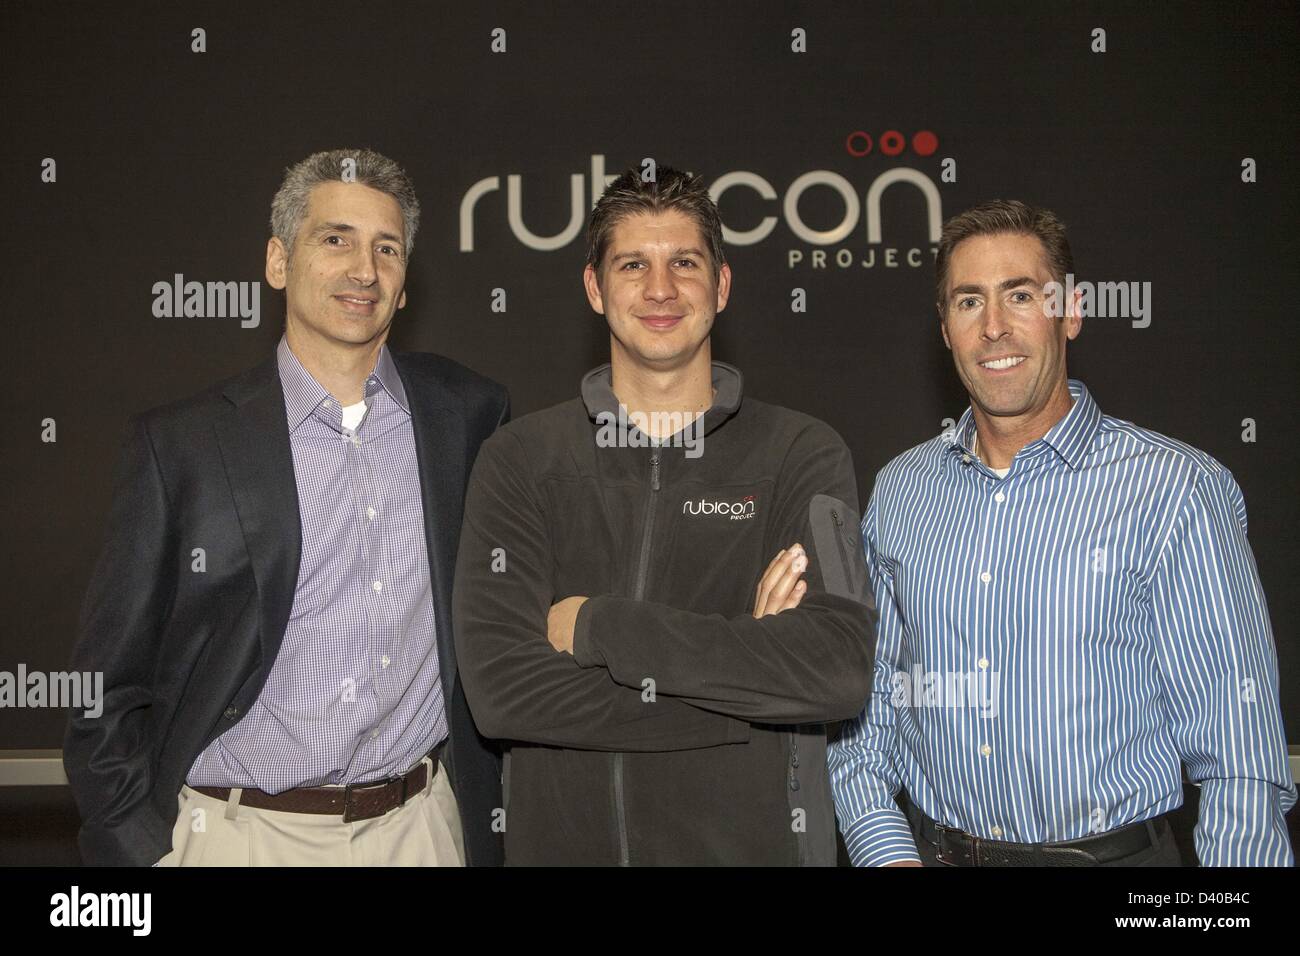 Feb. 11, 2013 - Los Angeles, California (CA, USA - Frank Addante, CEO and co-founder (center), Greg Raifman (L), president and Todd Tapin (R), COO/CFO of Rubicon Project, an ad tech company in West Los Angeles. (Credit Image: © Ringo Chiu/ZUMAPRESS.com) Stock Photo